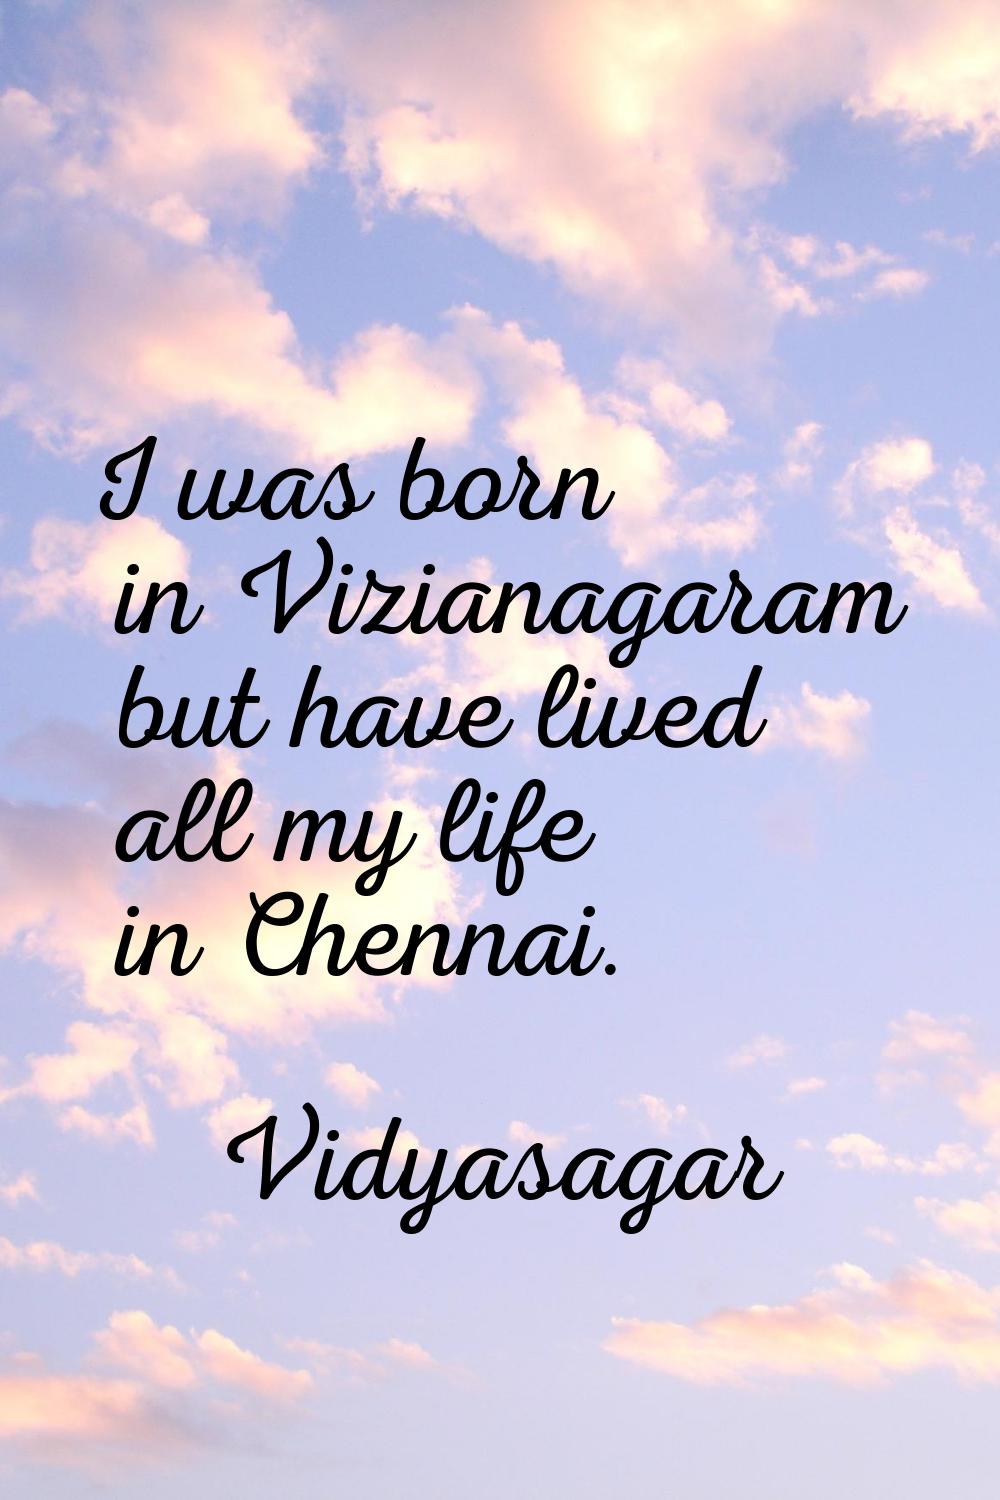 I was born in Vizianagaram but have lived all my life in Chennai.